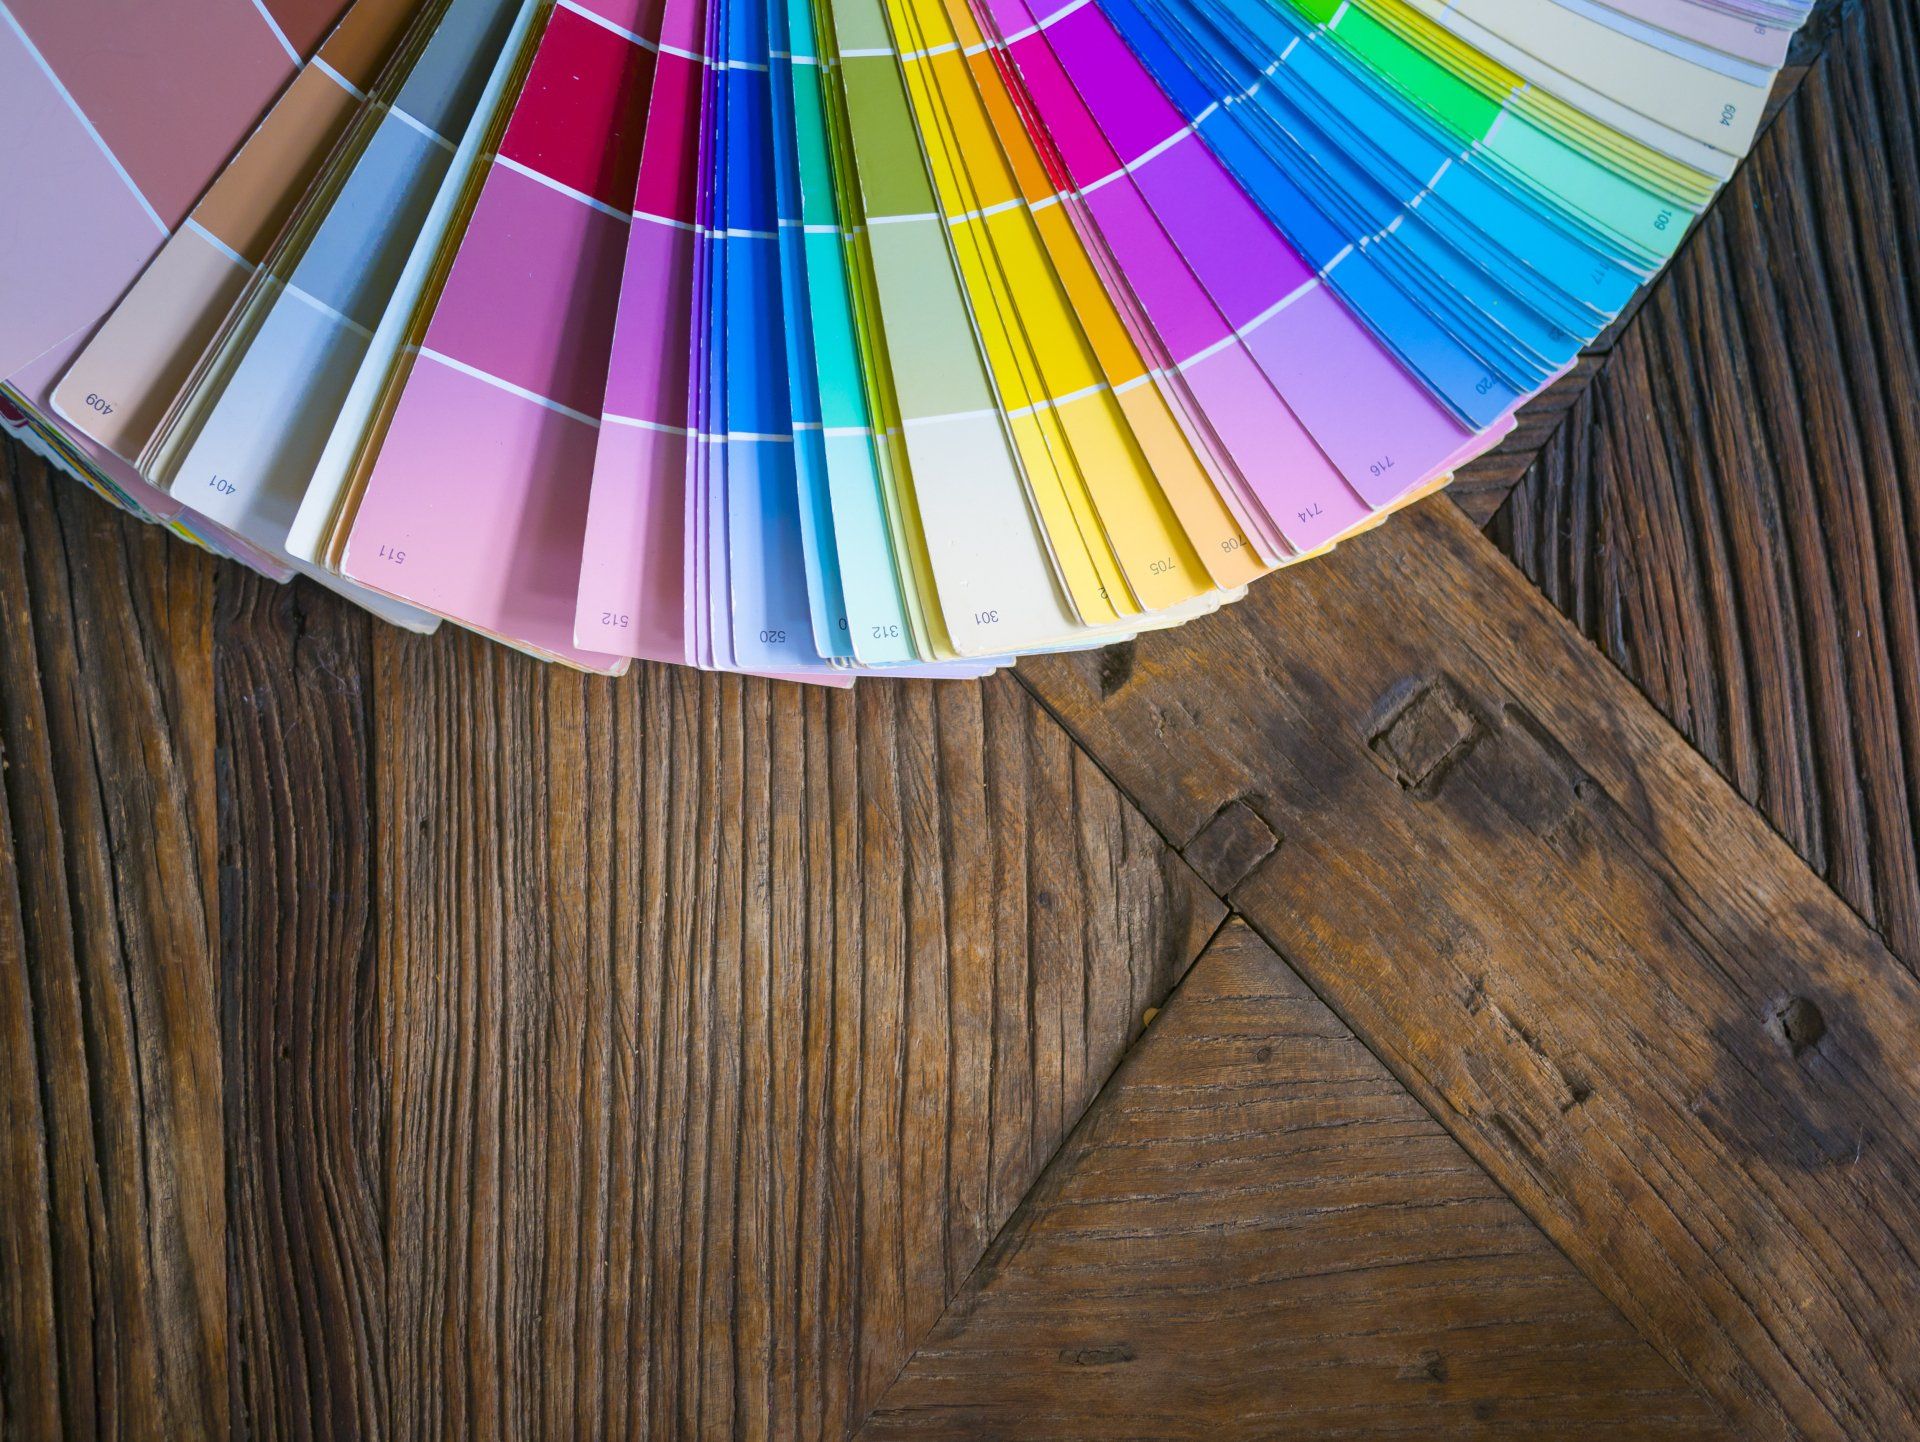 A fan of color samples on a wooden table